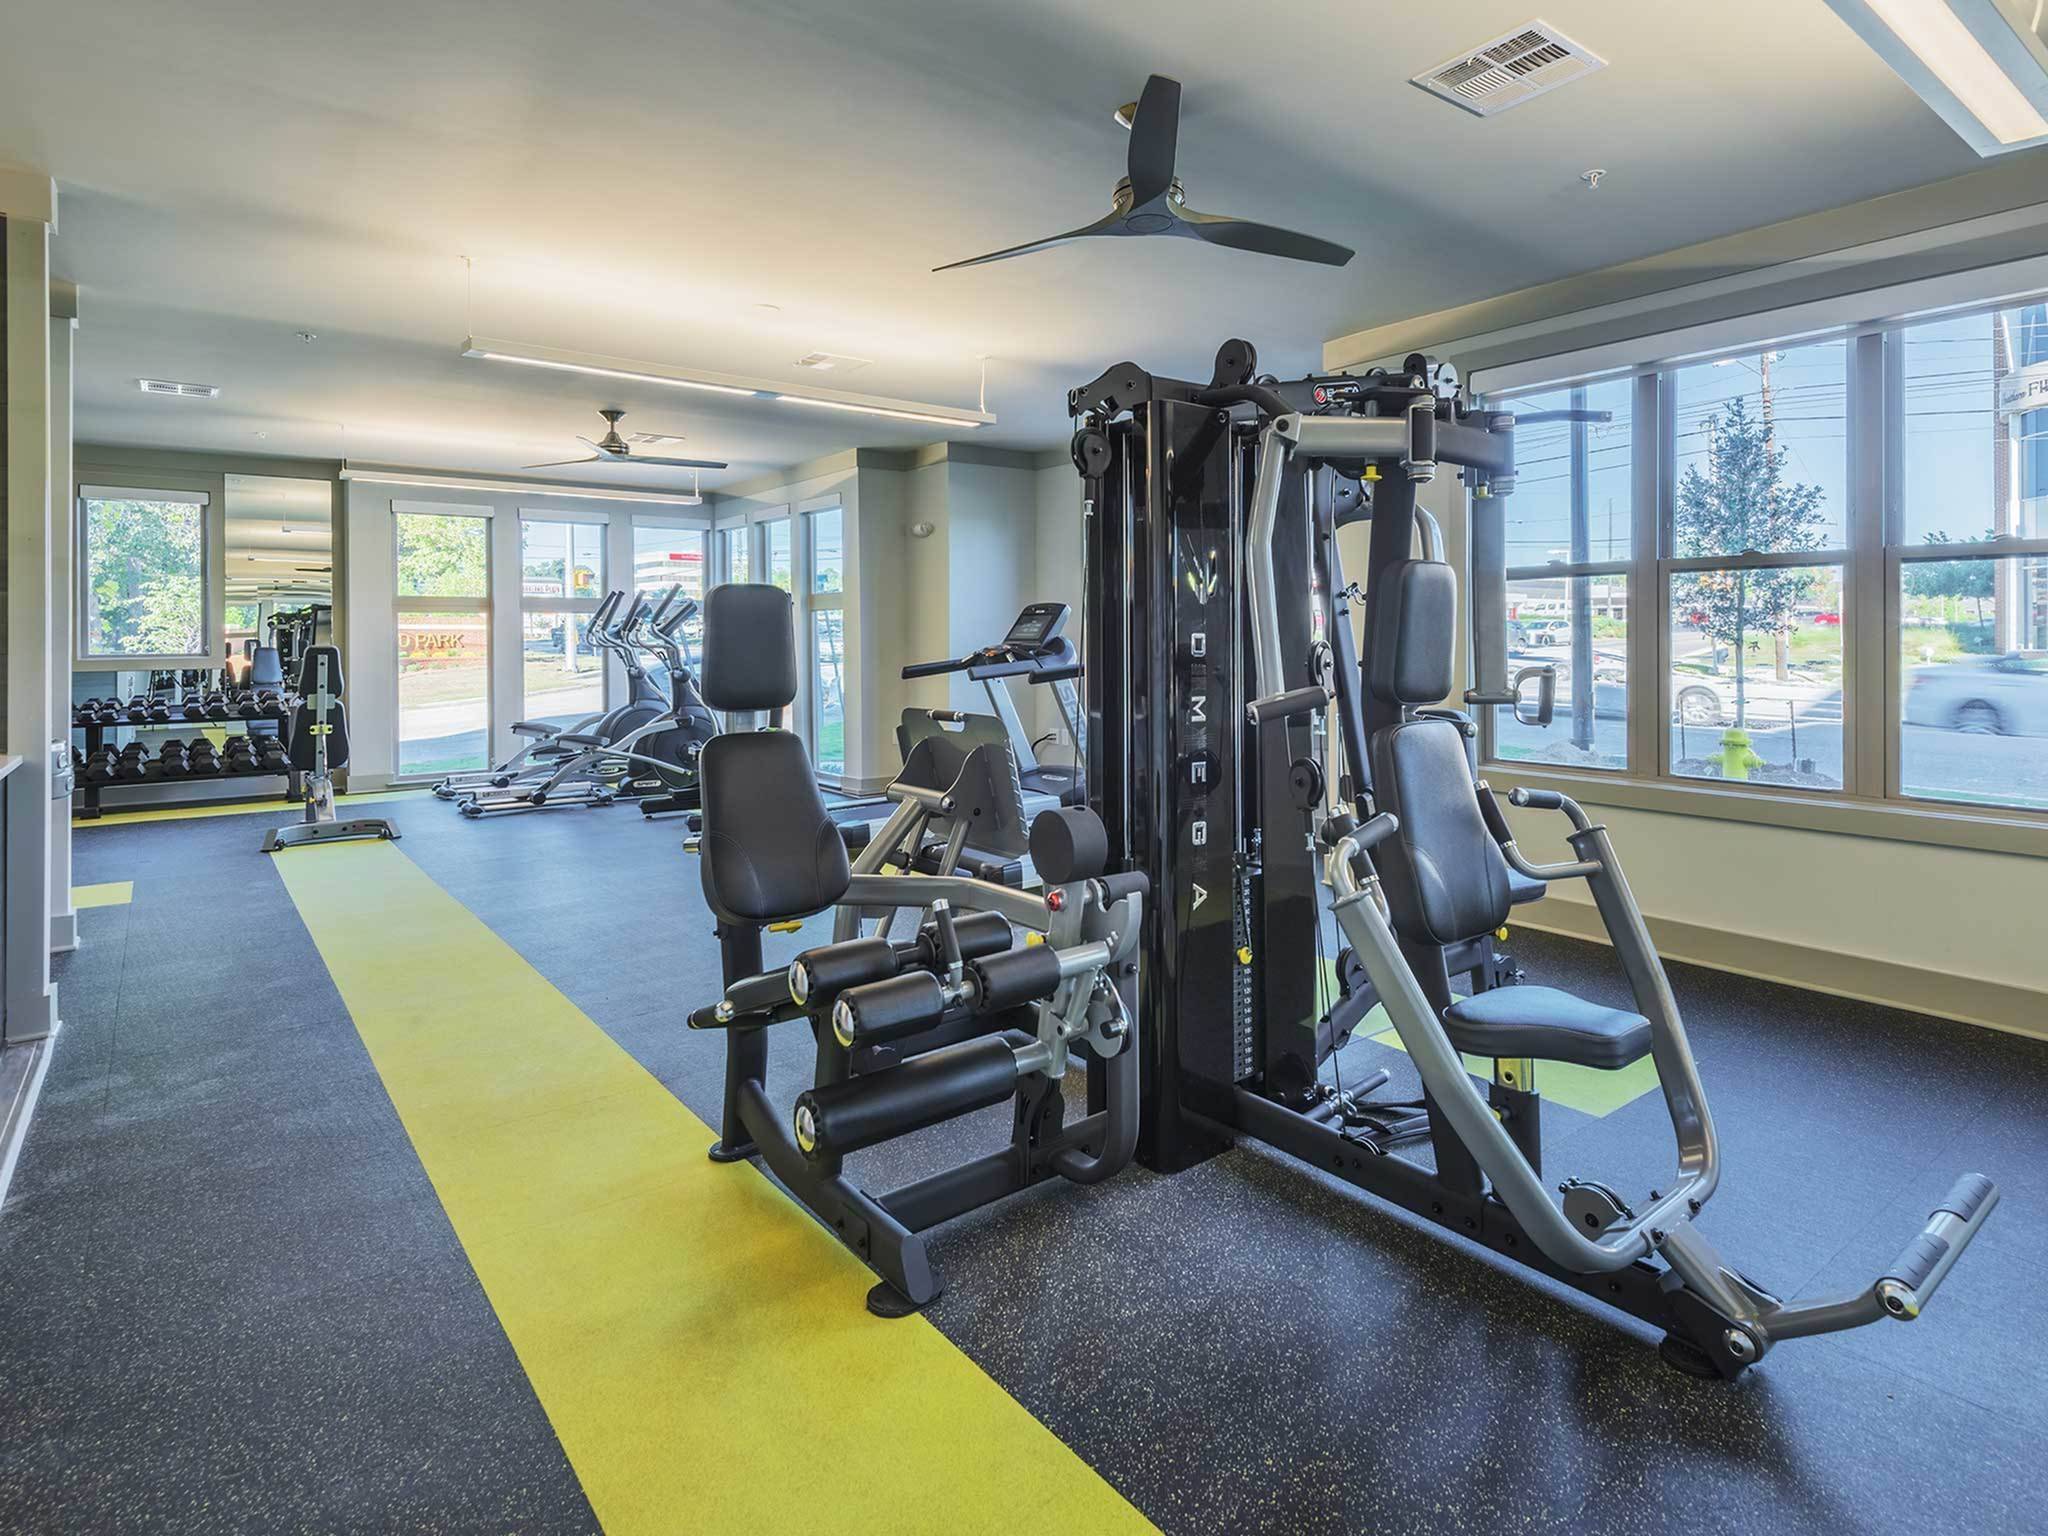 Apartment community 24-hour fitness center with weights, cardio and cable equipment.